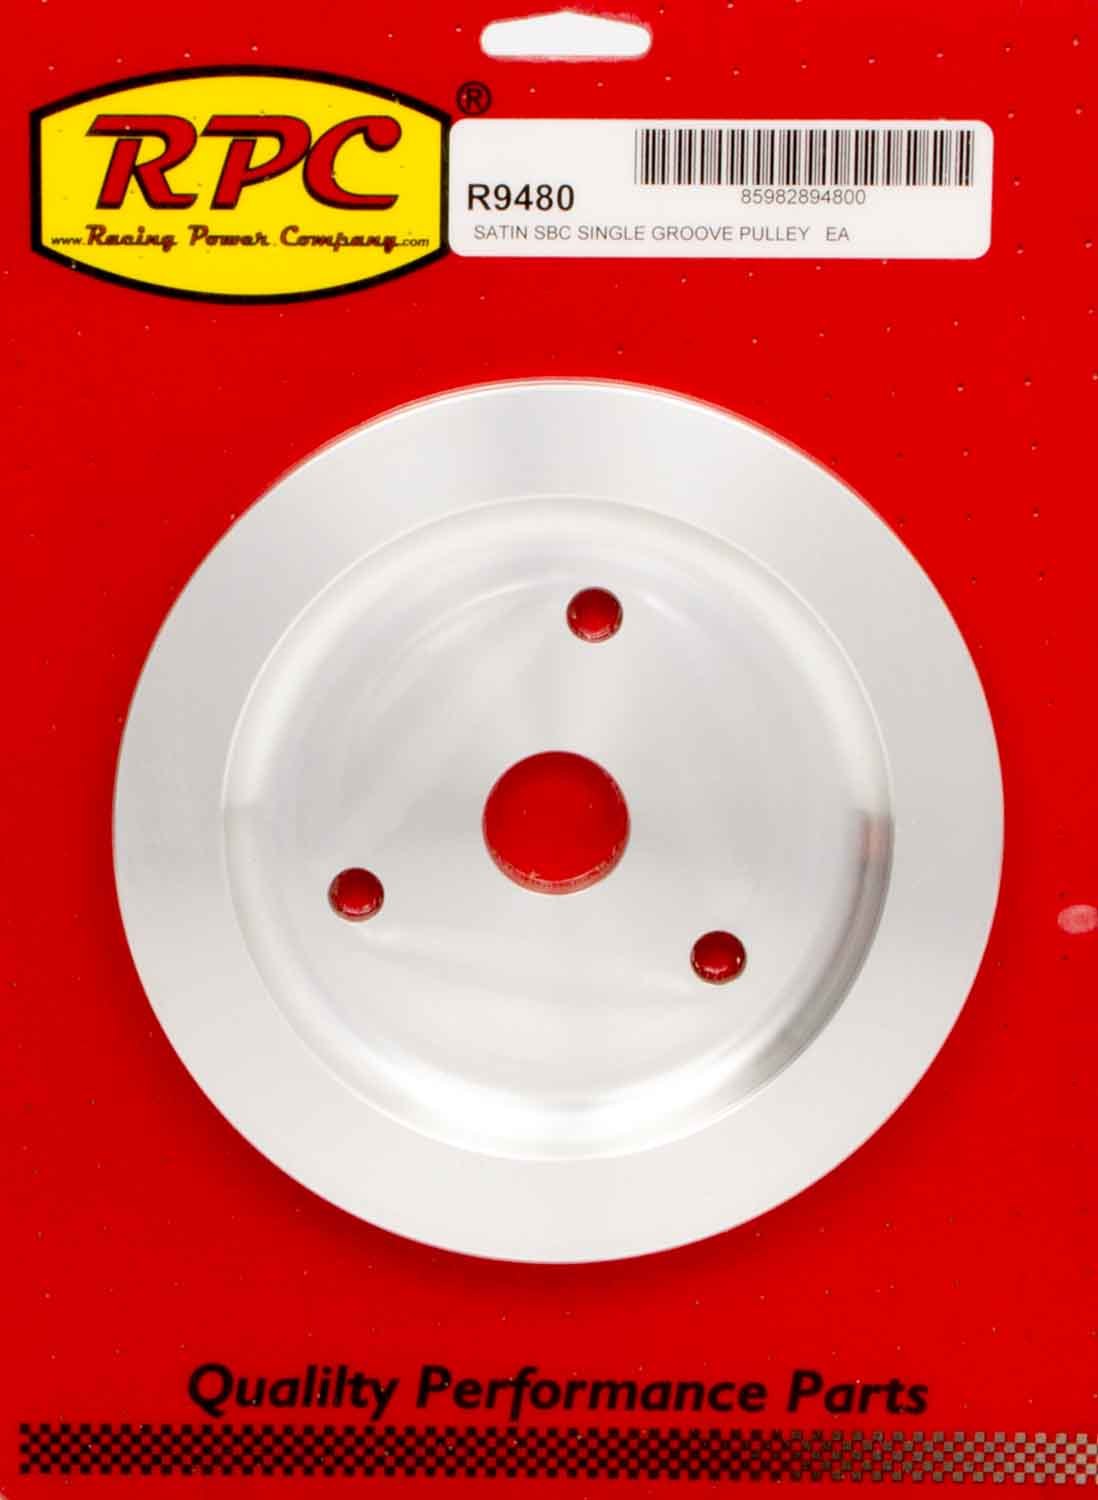 Racing Power Company R9480 - Aluminum Pulley 